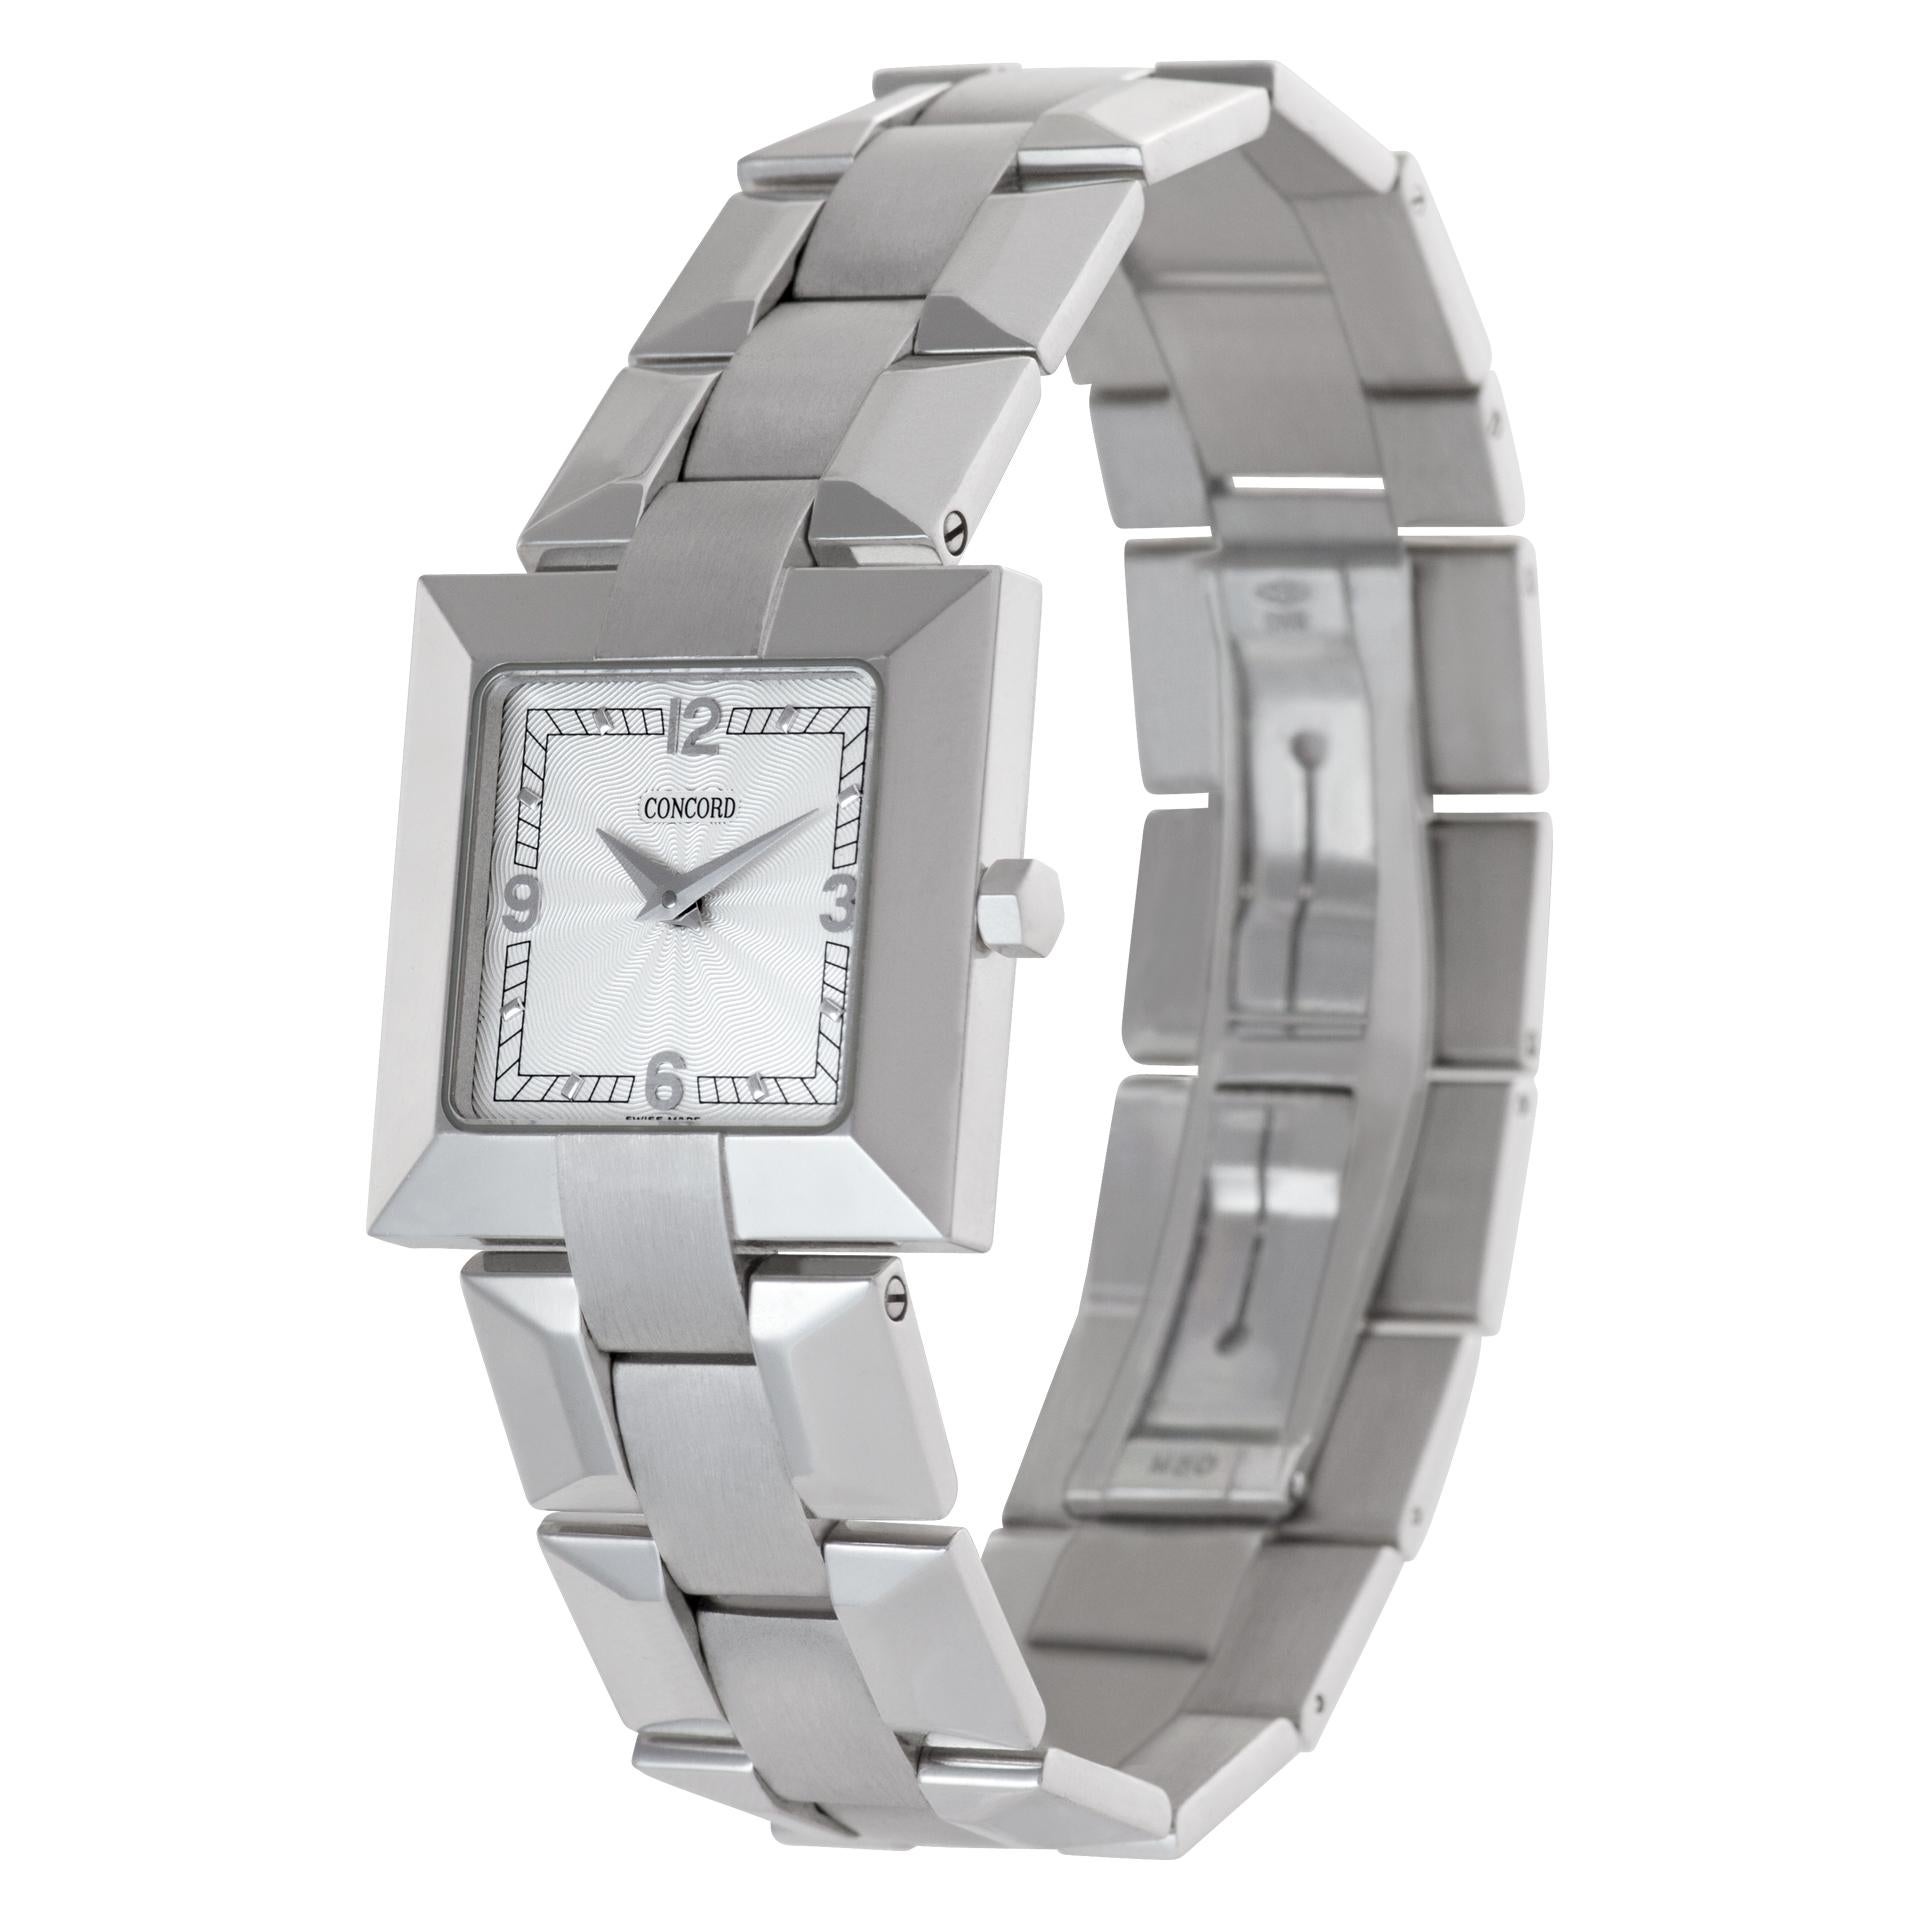 Concord Square La Scala watch in 18k white gold. Fits 7.5 inches wrist. Quartz. 27 mm case size. Ref 60-46-522. Circa 2000. Fine Pre-owned Concord Watch.

Certified preowned Dress Concord La Scala 60-46-522 watch is made out of white gold on a 18k